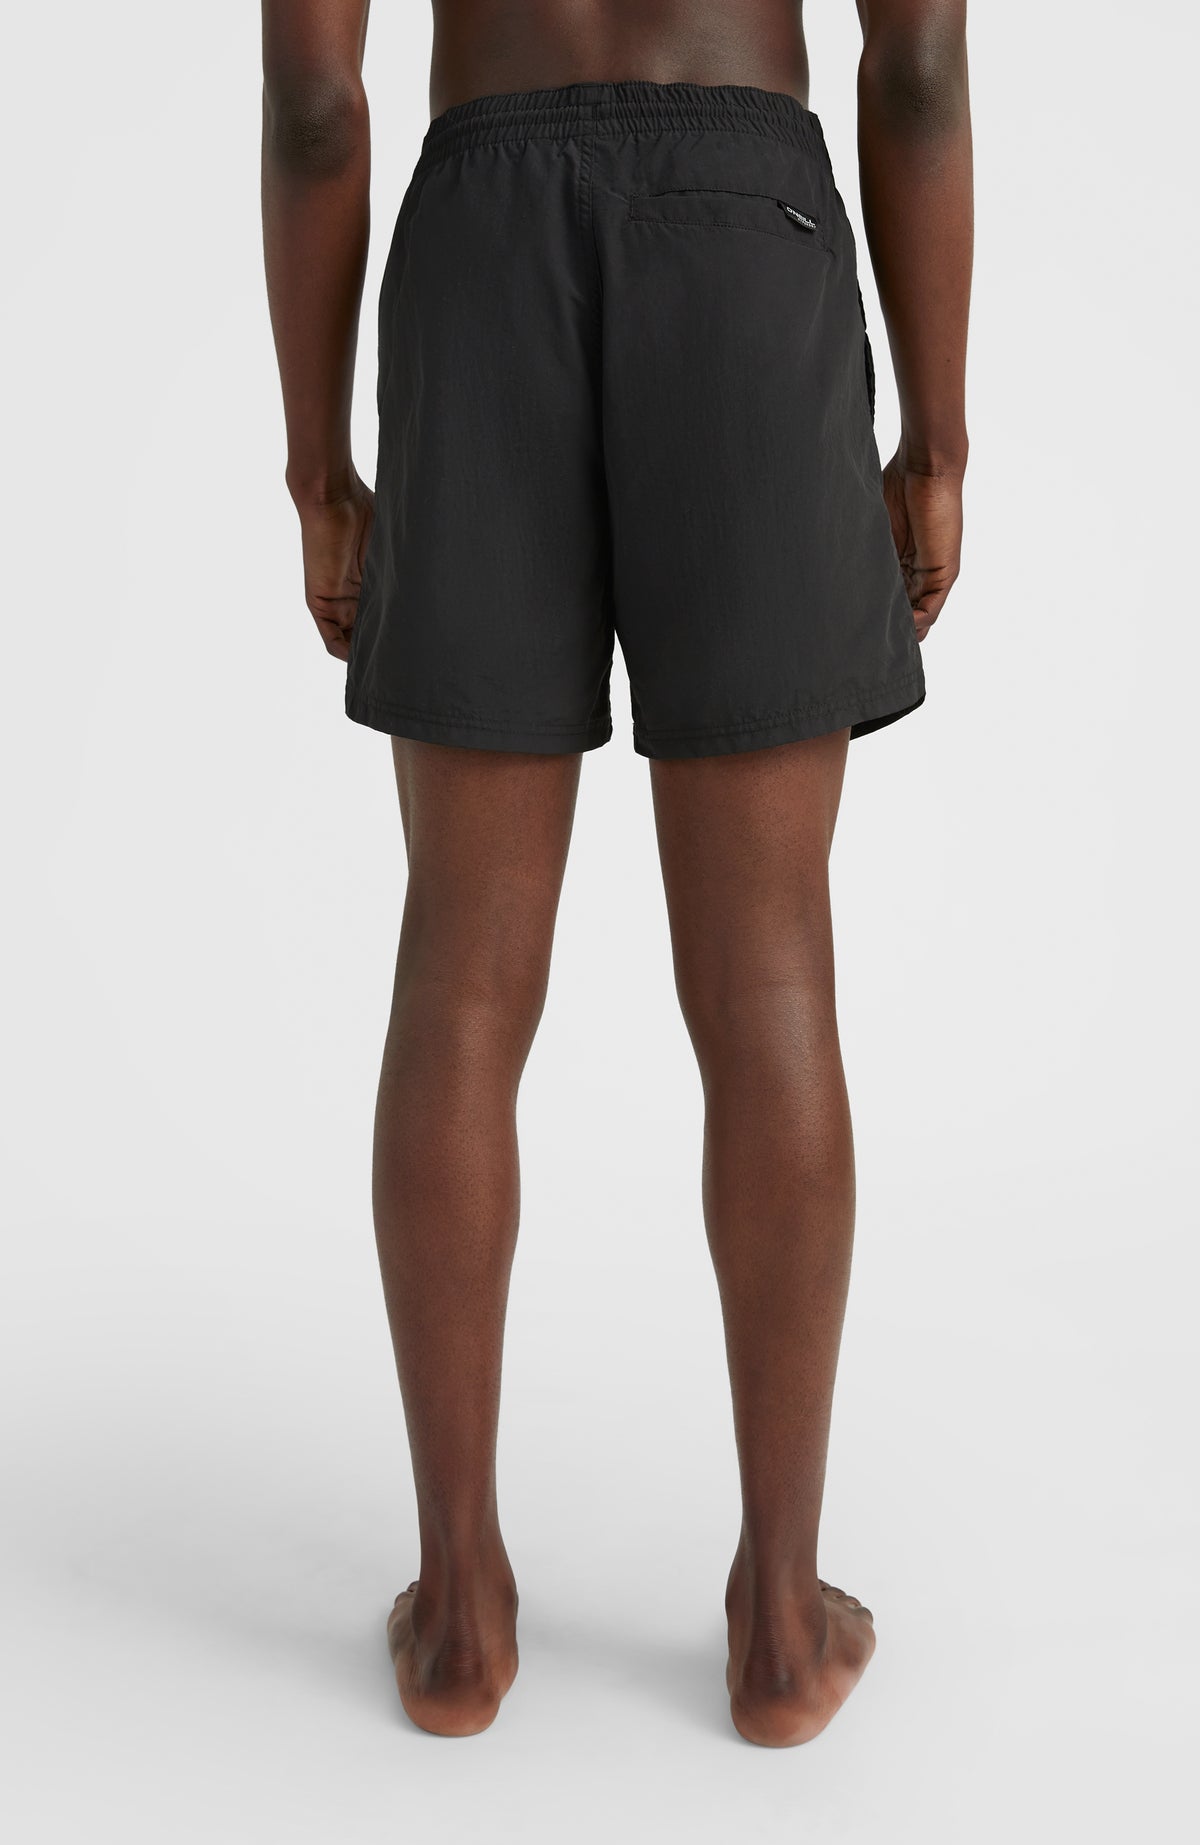 Cali Melted Print 16'' Swim Shorts | Black Out – O'Neill